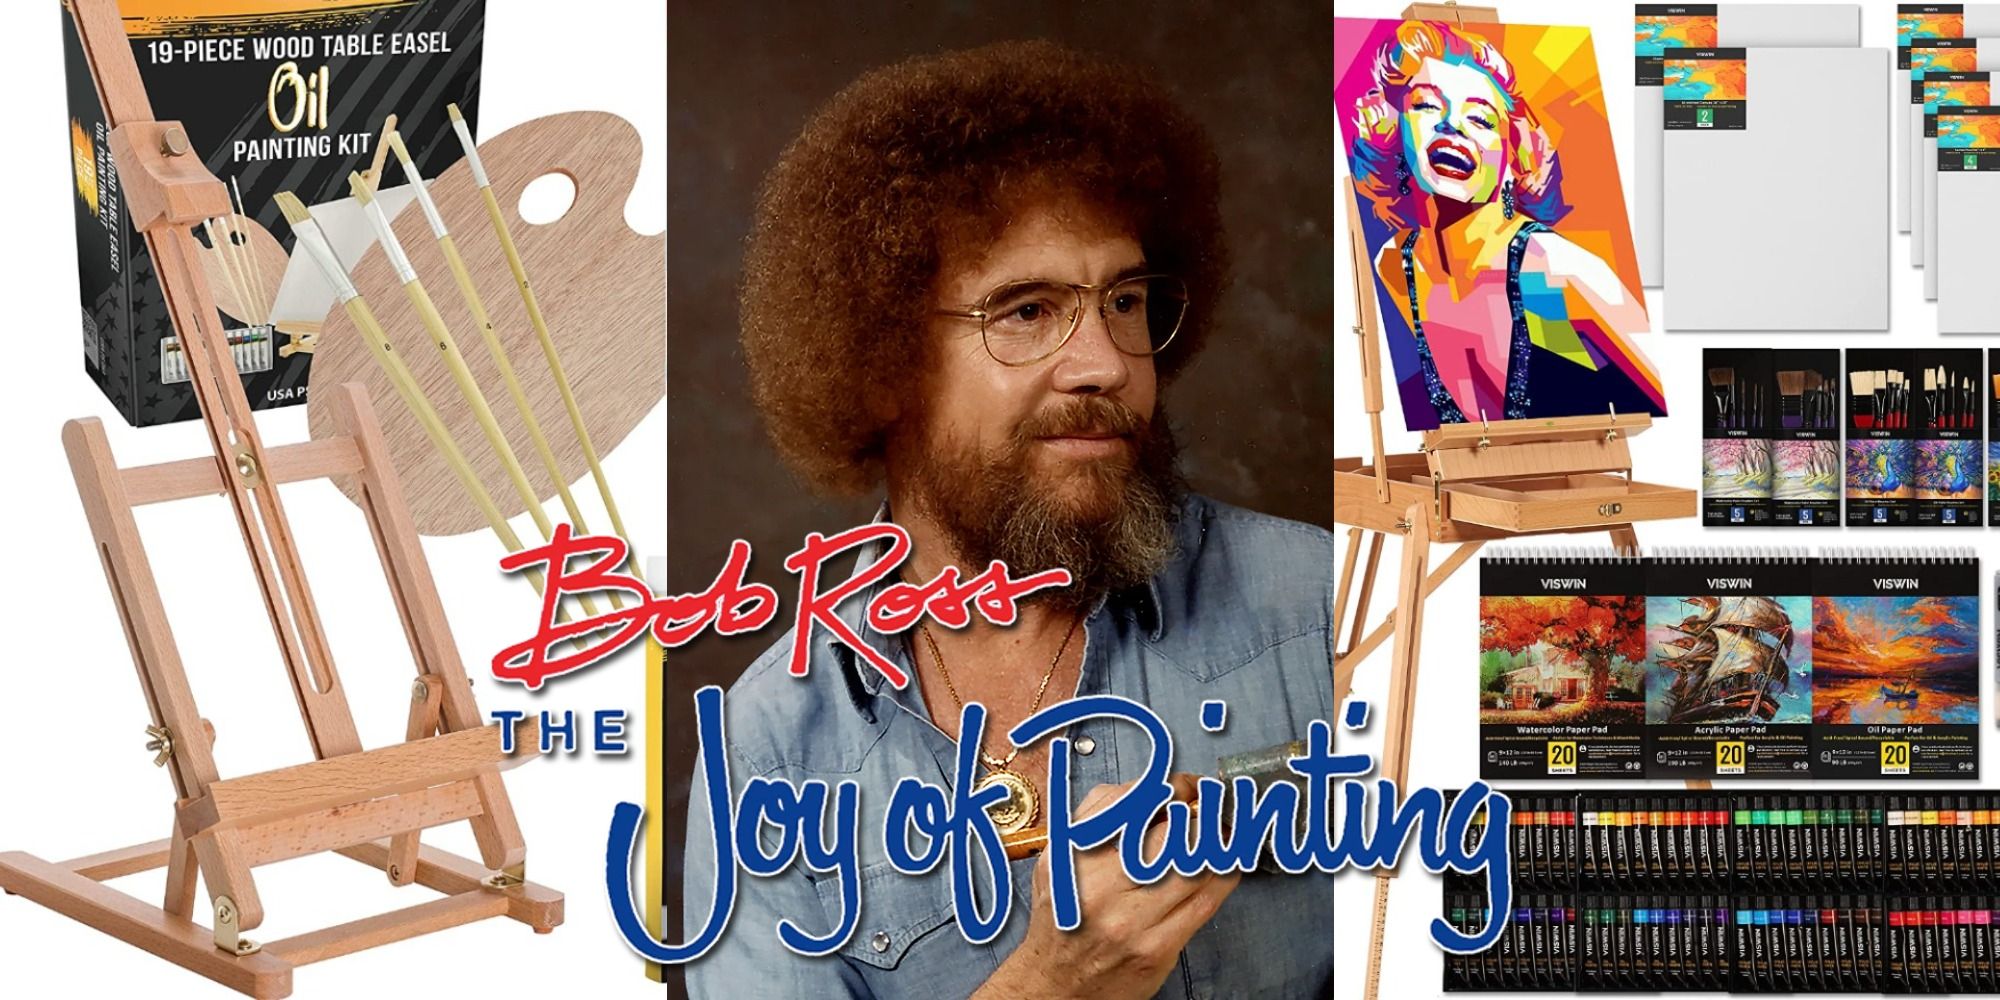 How To Build A CHEAP Bob Ross Painting Kit For New Painters! 